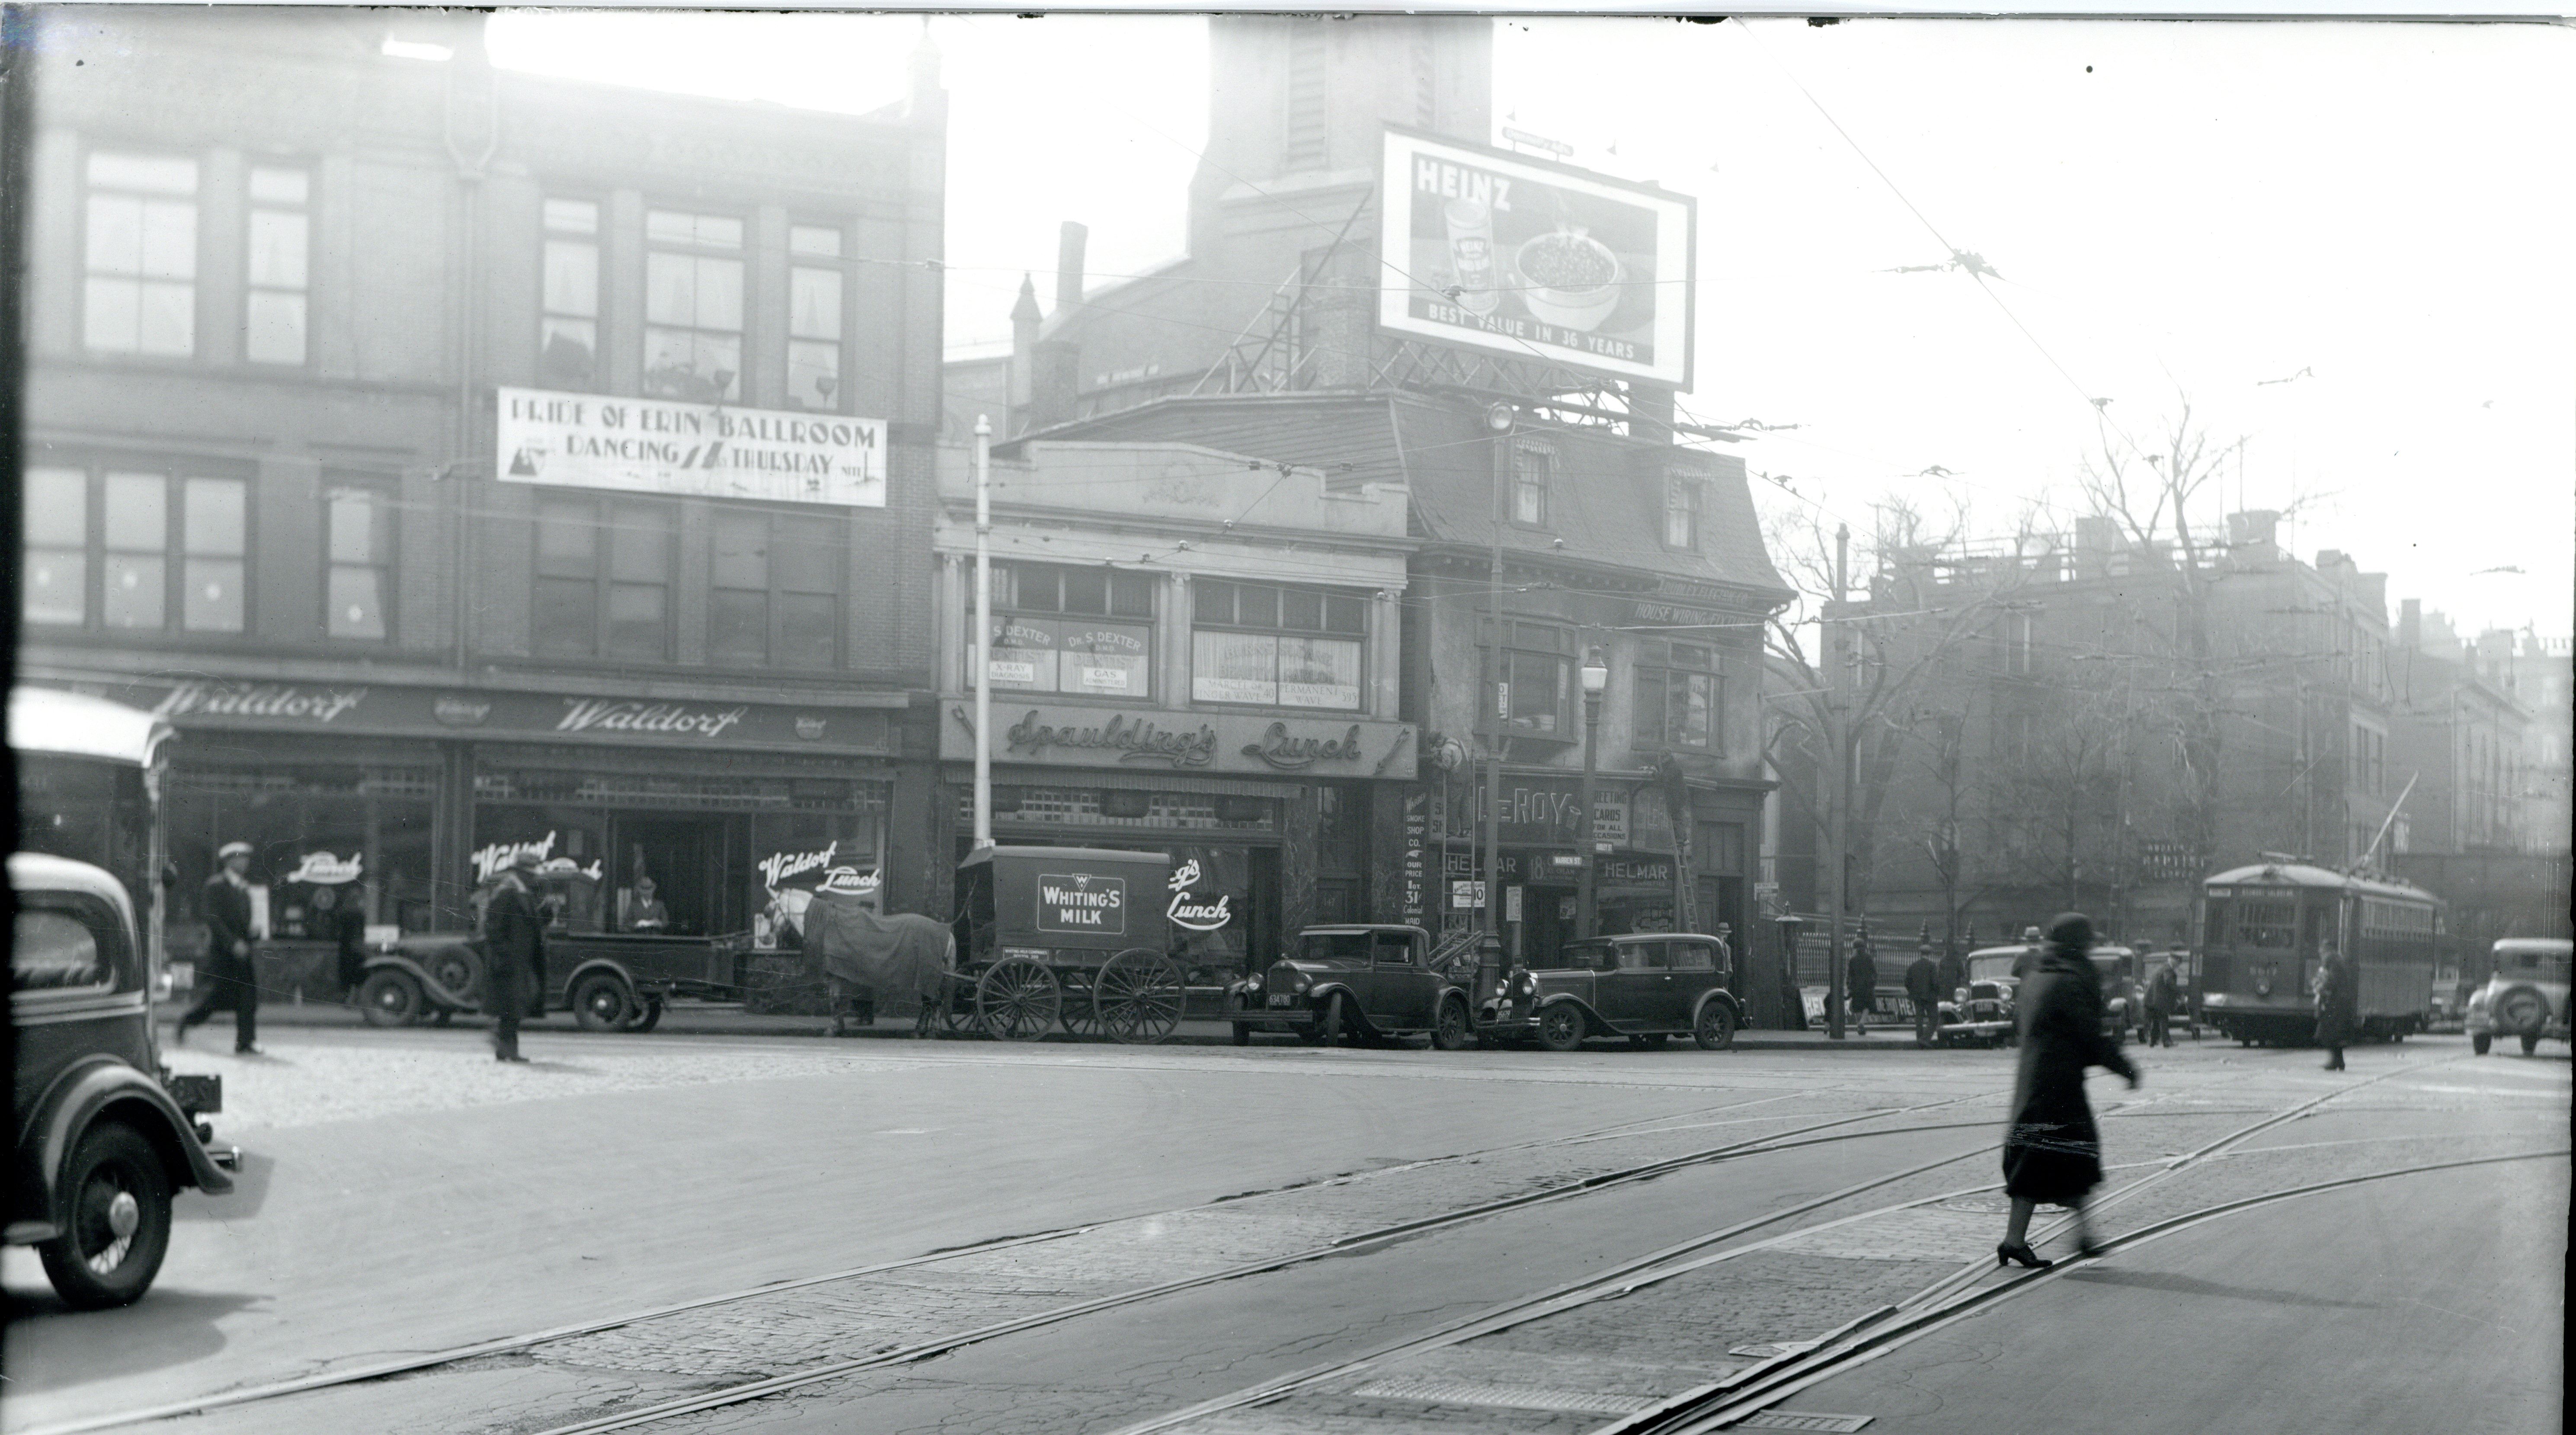 Pride of Erin Ballroom at Dudley and Warren Streets, circa 1928-1930, Boston City Archives